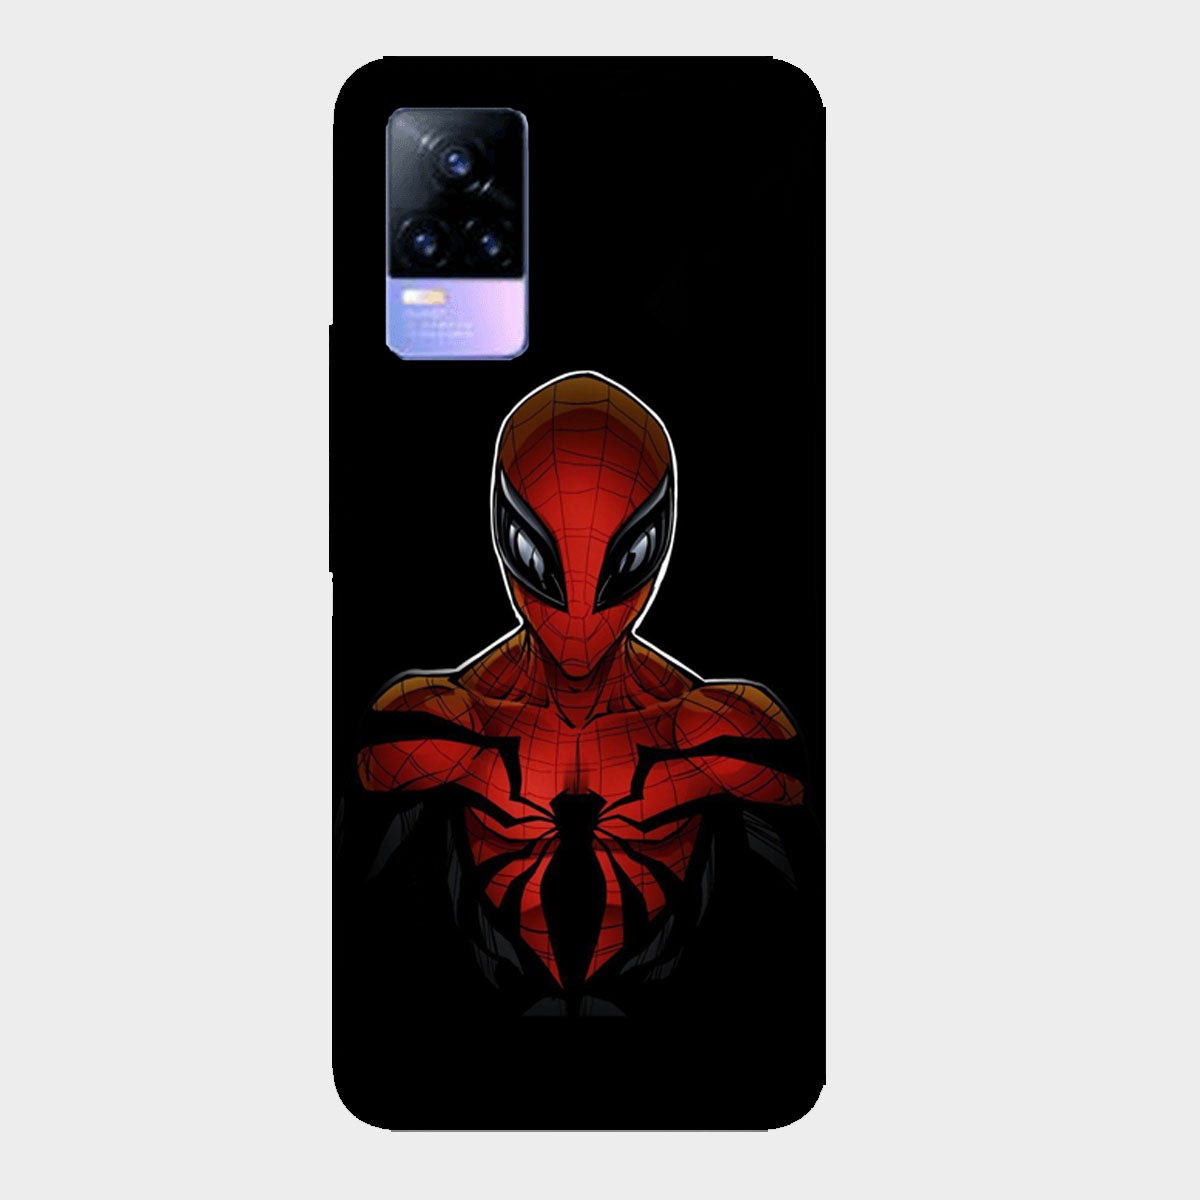 Spider Man - Animated - Mobile Phone Cover - Hard Case - Vivo